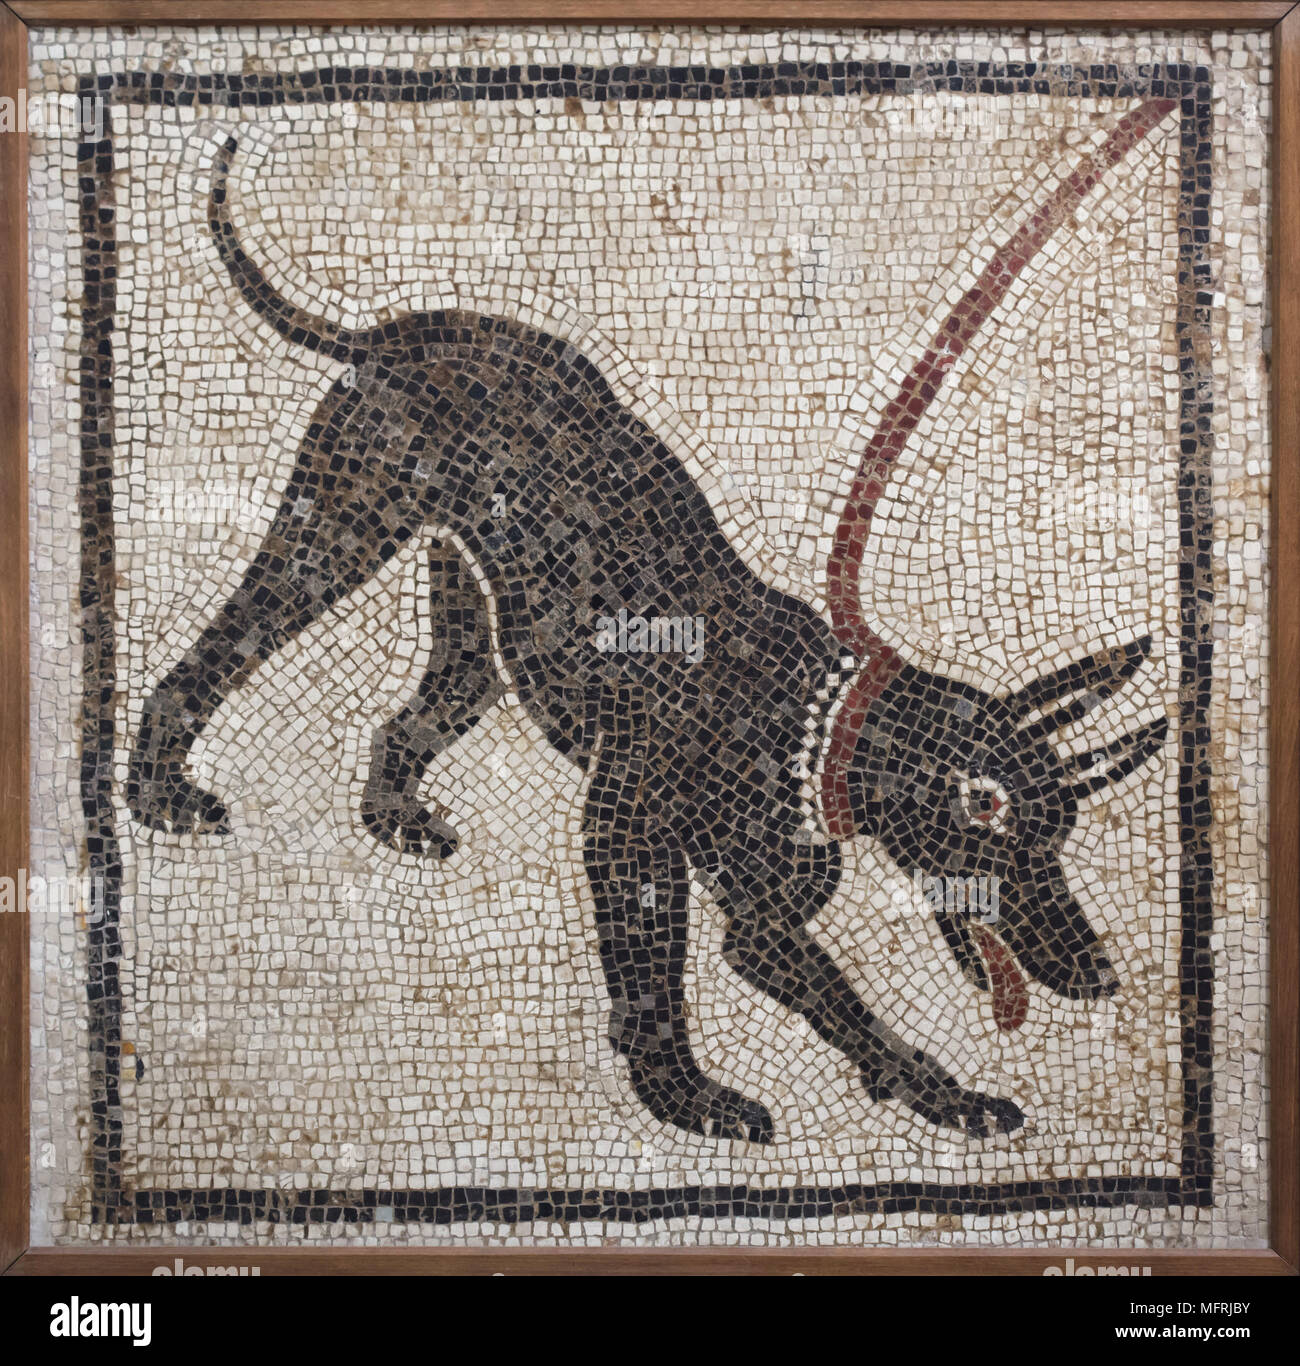 Dog depicted in the Roman mosaic Cave canem (Beware of the Dog) from the Casa di Orfeo (House of Orpheus) in Pompeii, now on display in the National Archaeological Museum (Museo Archeologico Nazionale di Napoli) in Naples, Campania, Italy. Stock Photo